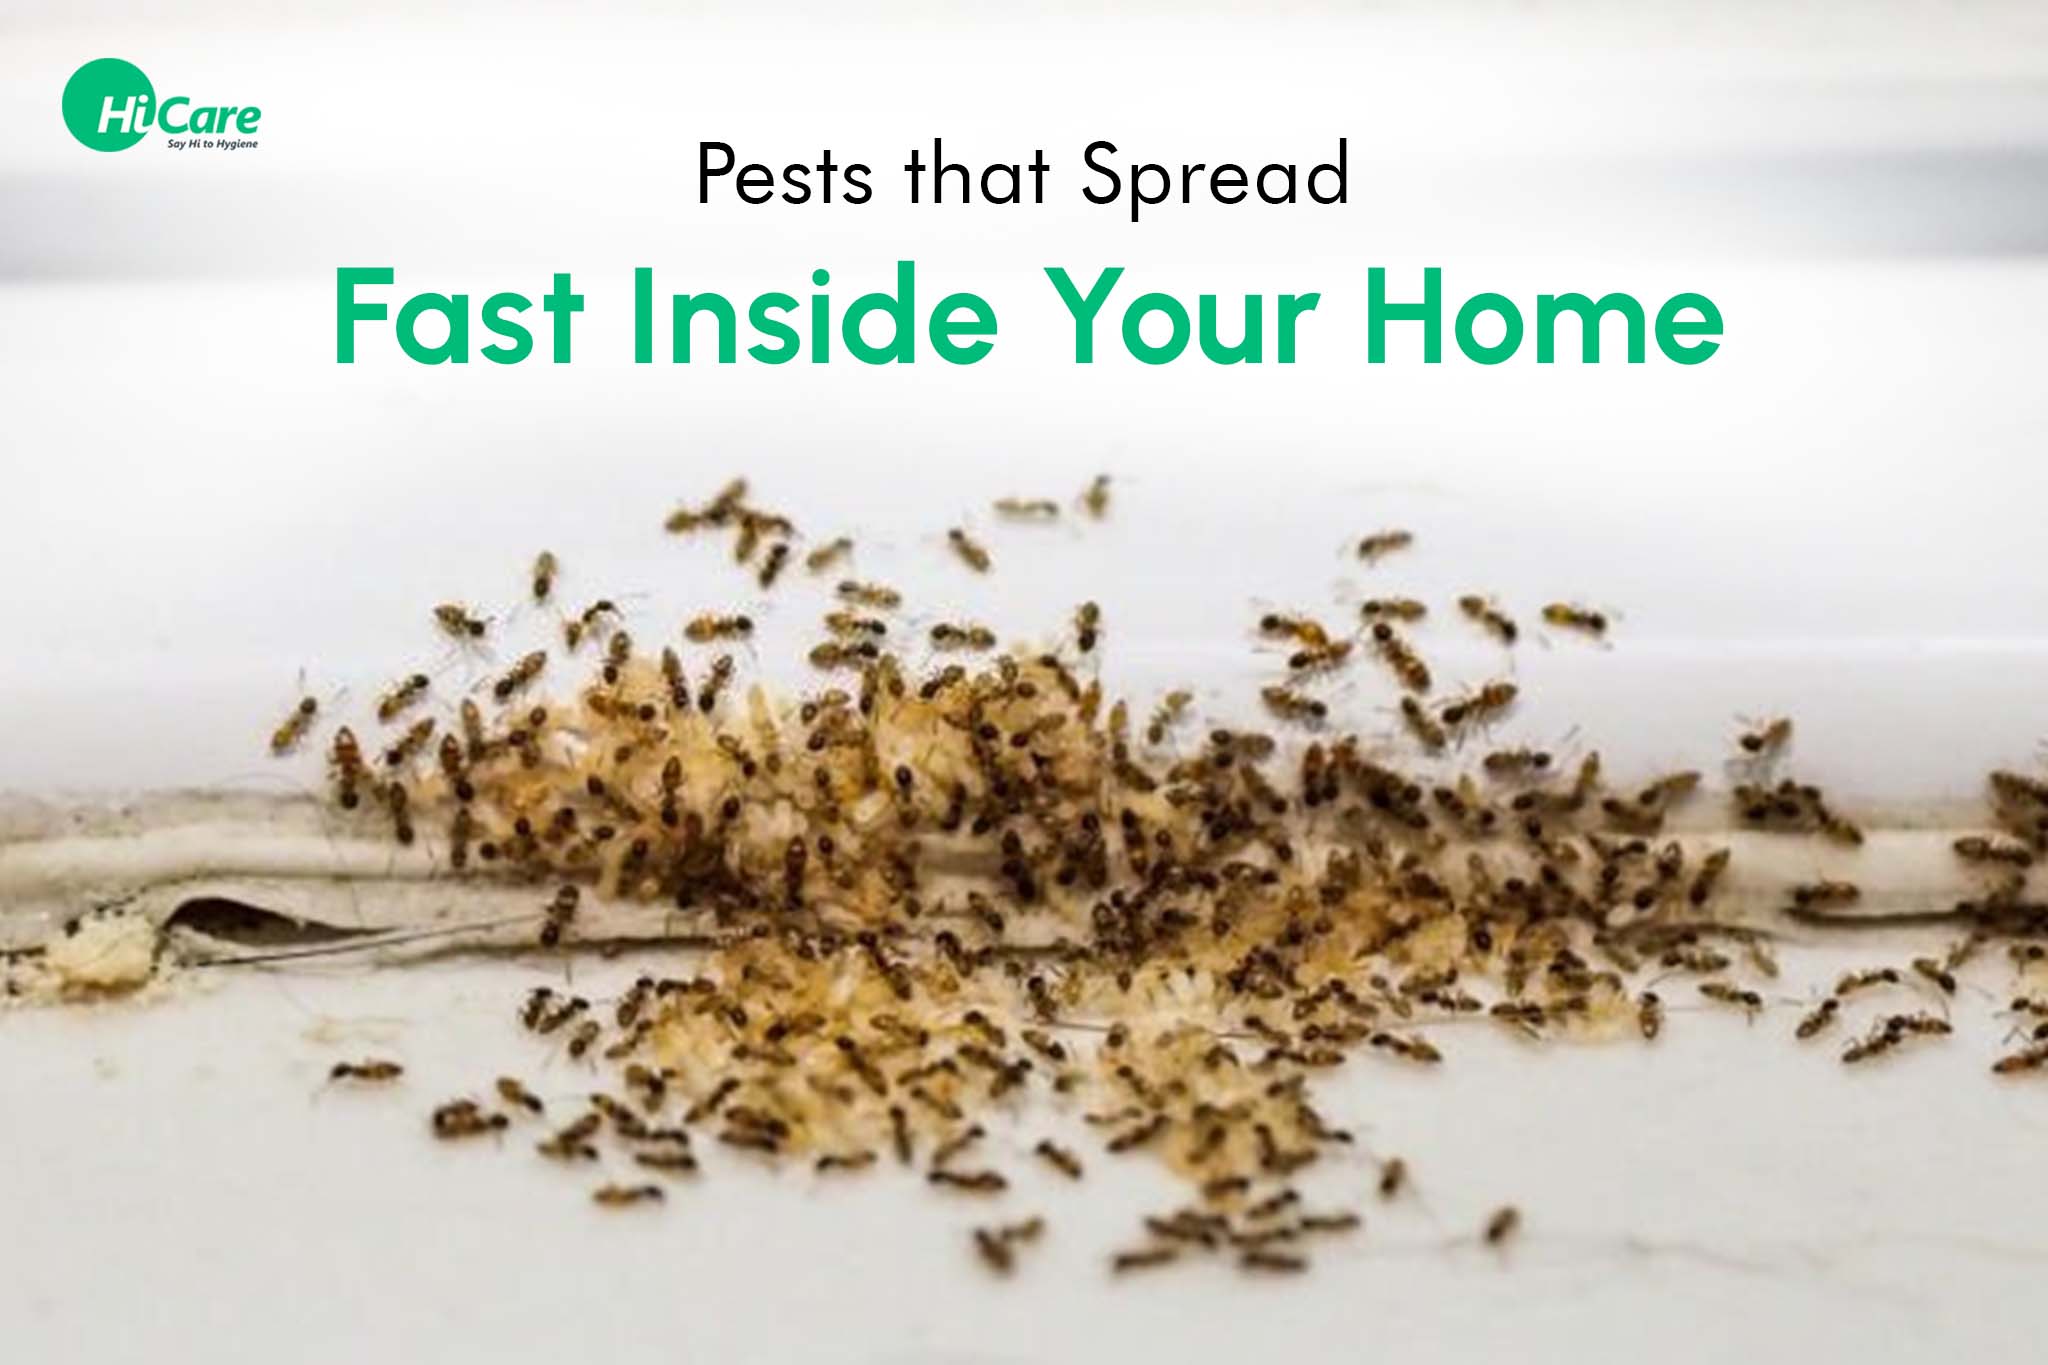 5 Pests that Spread Fast Inside Your Home